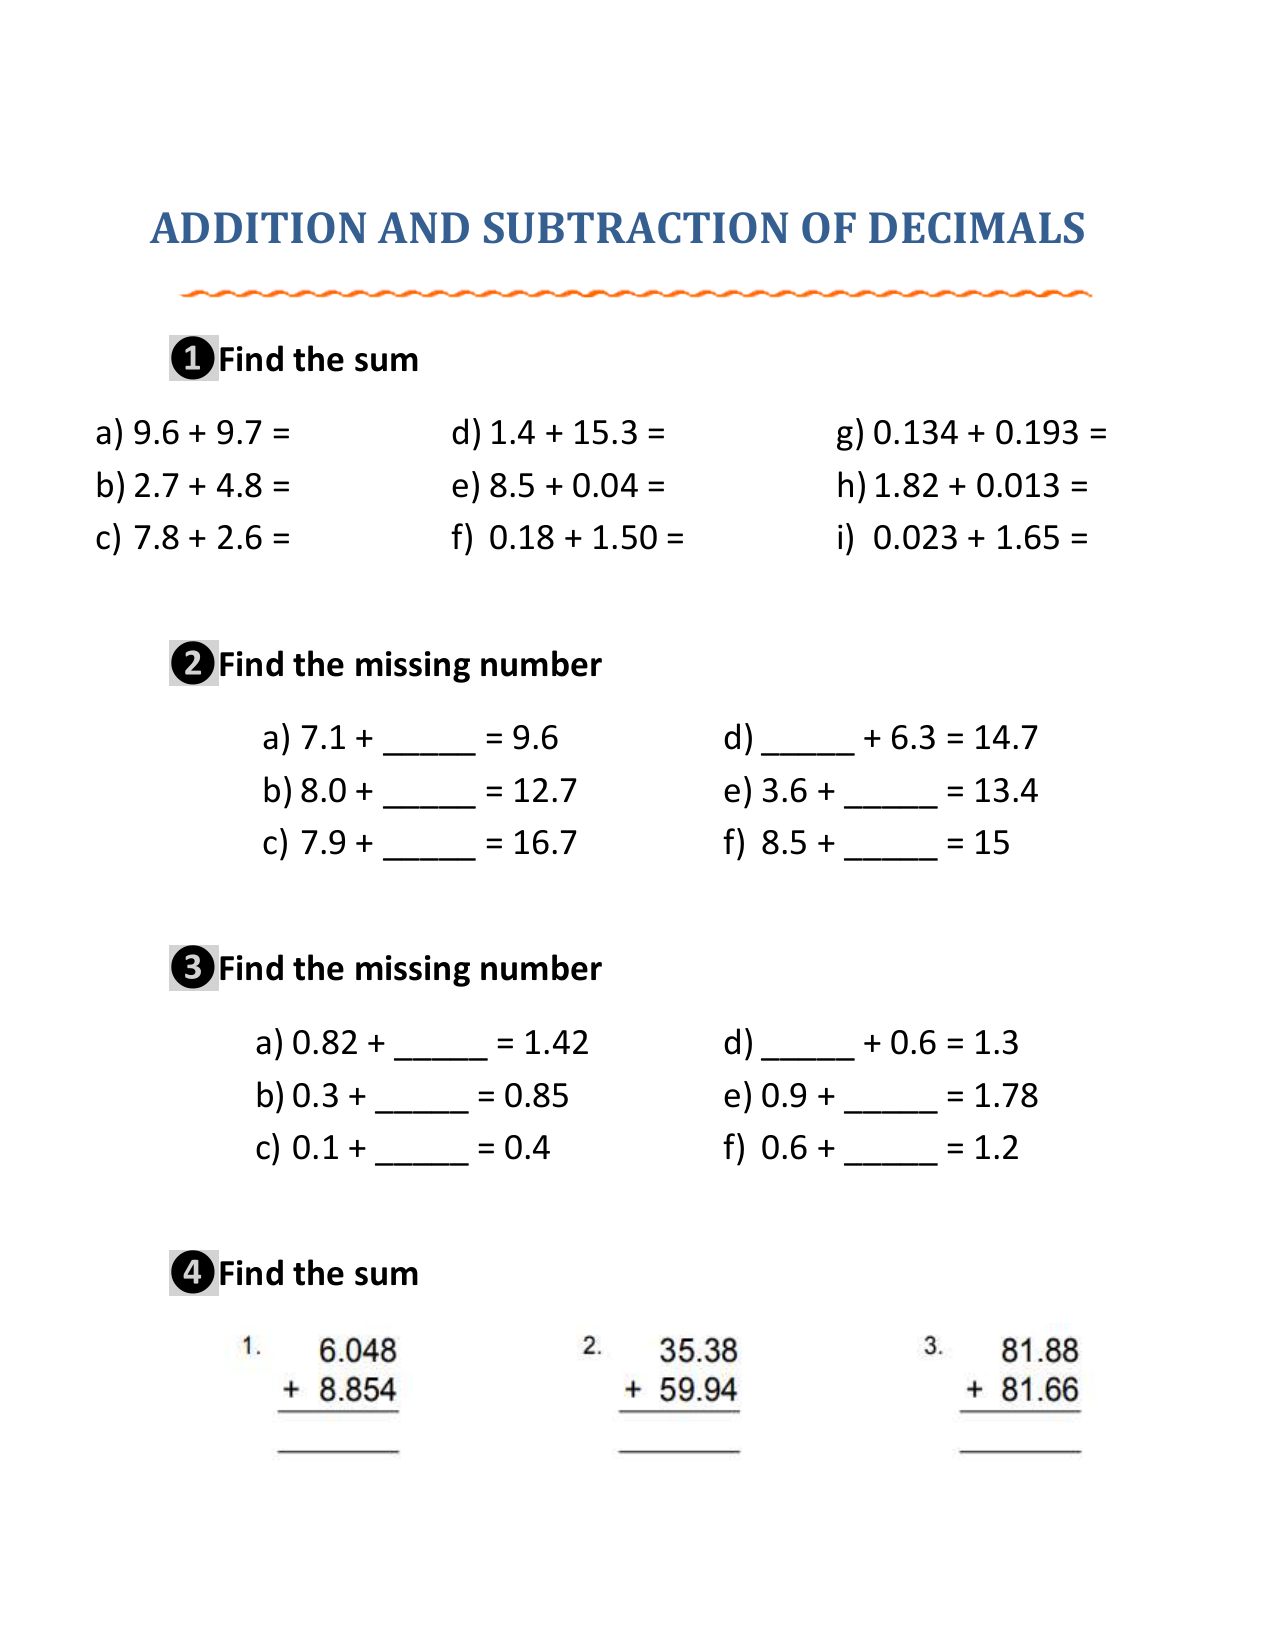 addition and subtraction of decimals problem solving